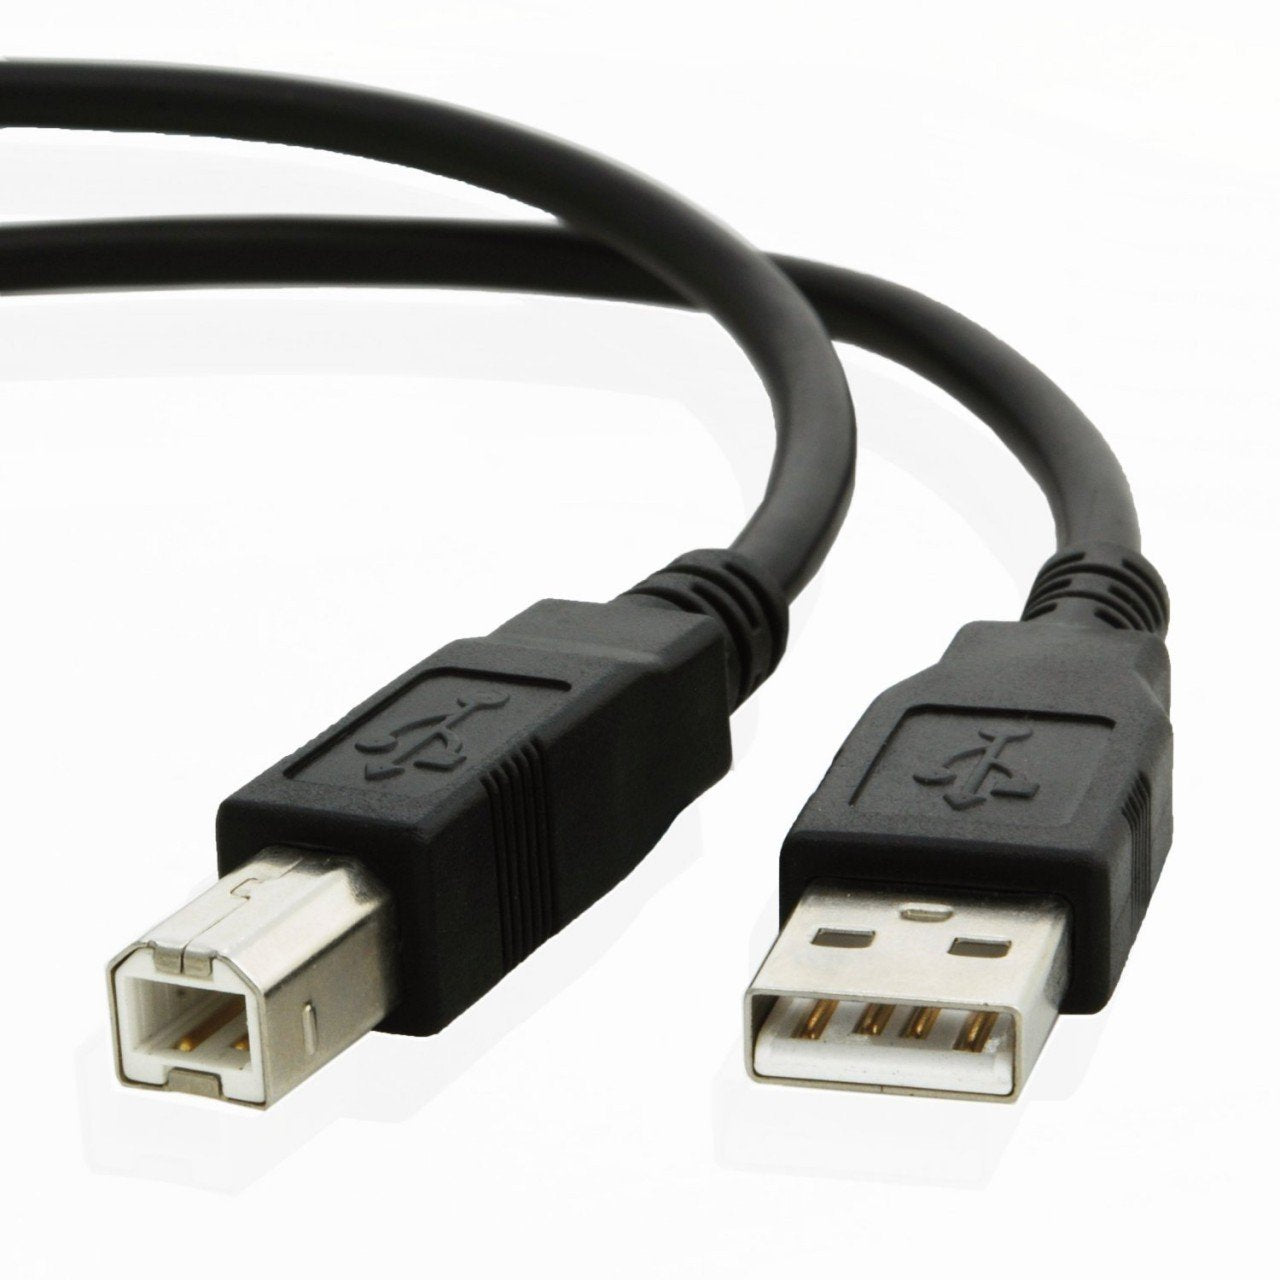 USB cable for Canon PIXMA MG2150